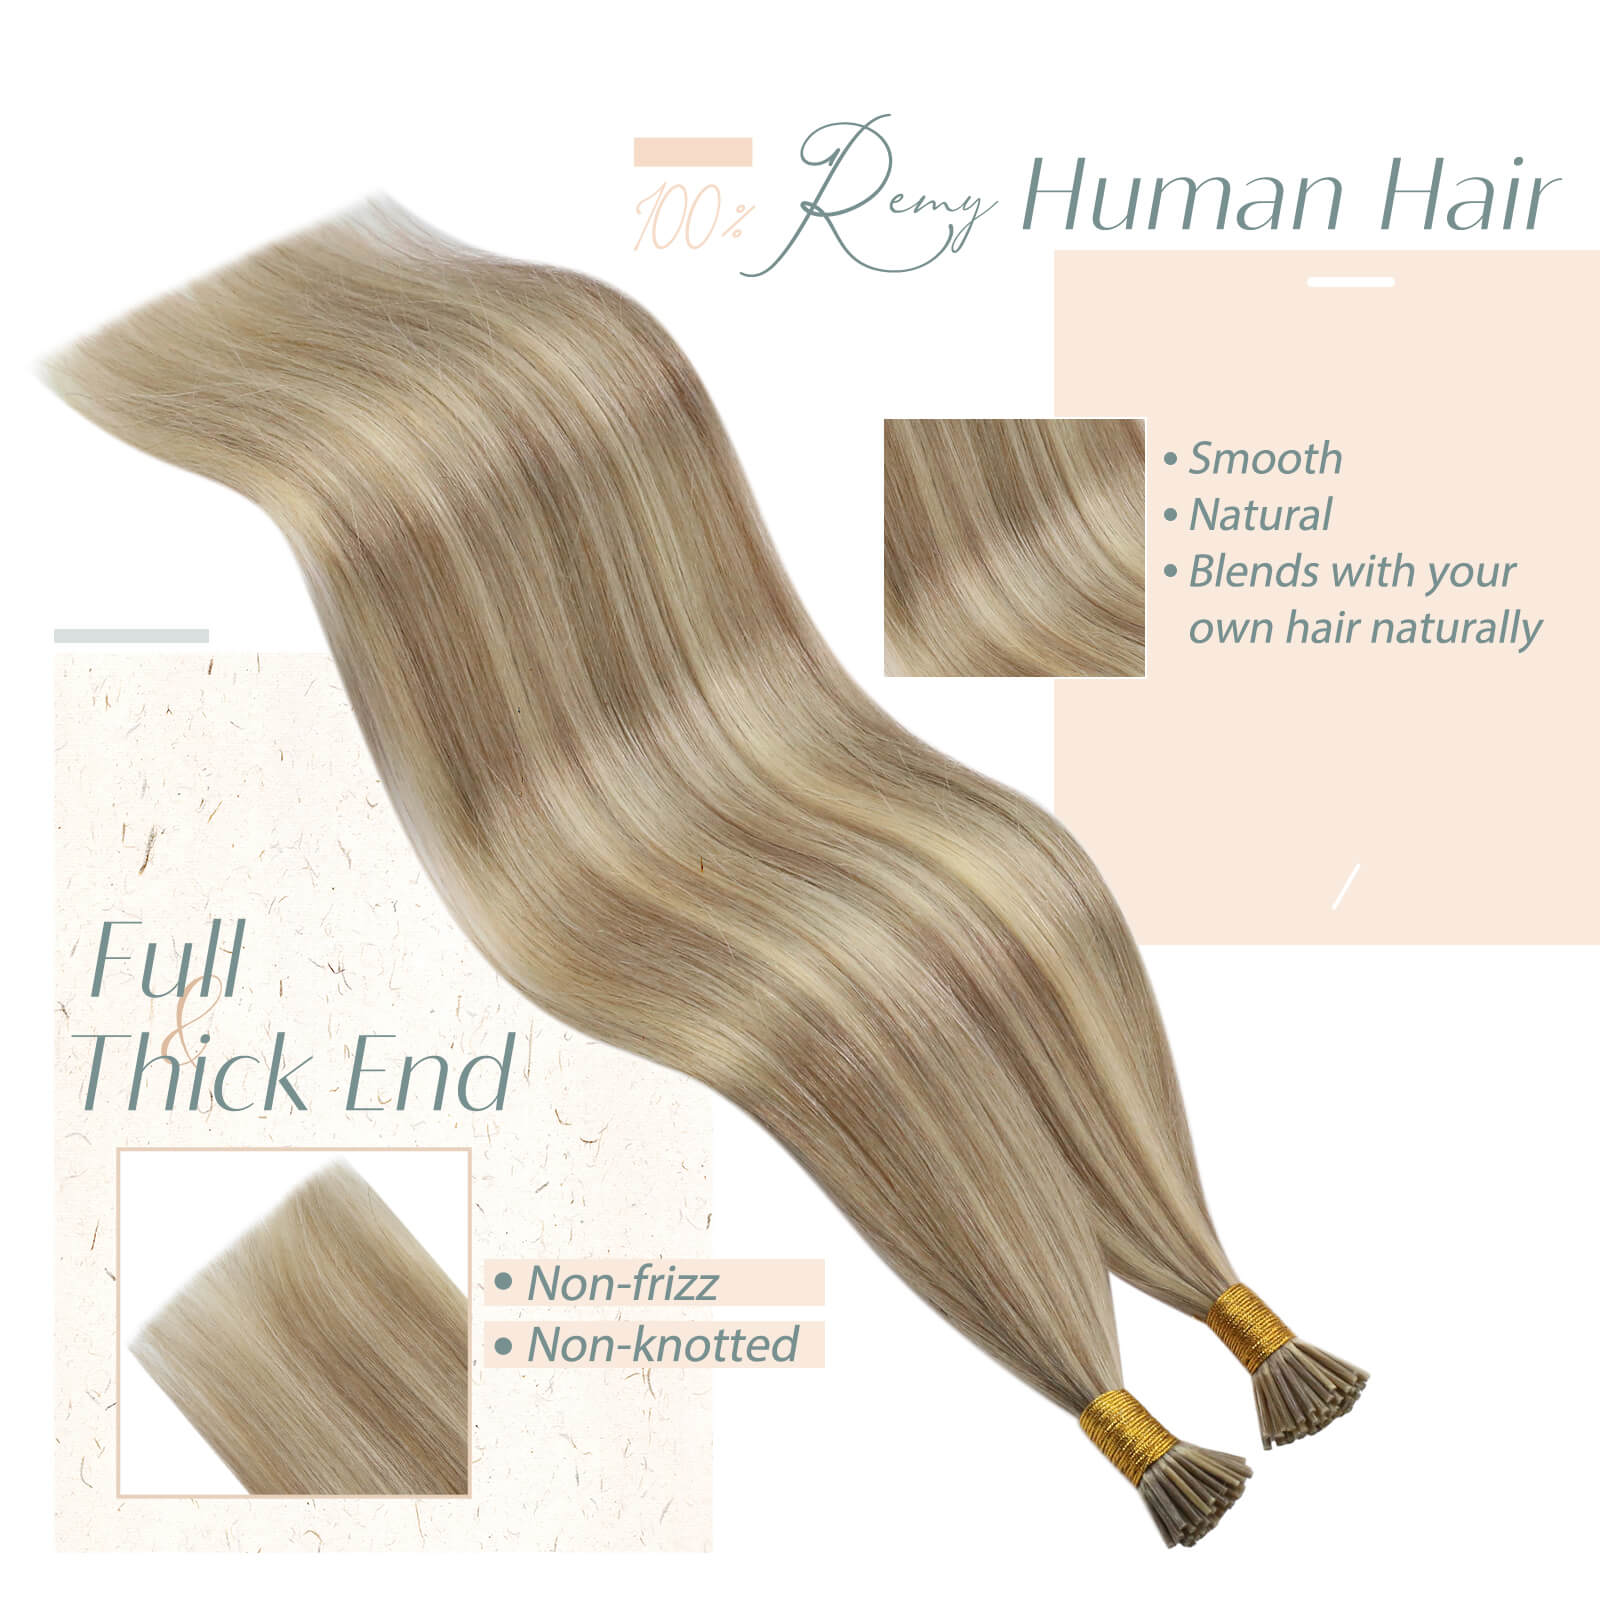 I tip fusion hair extension